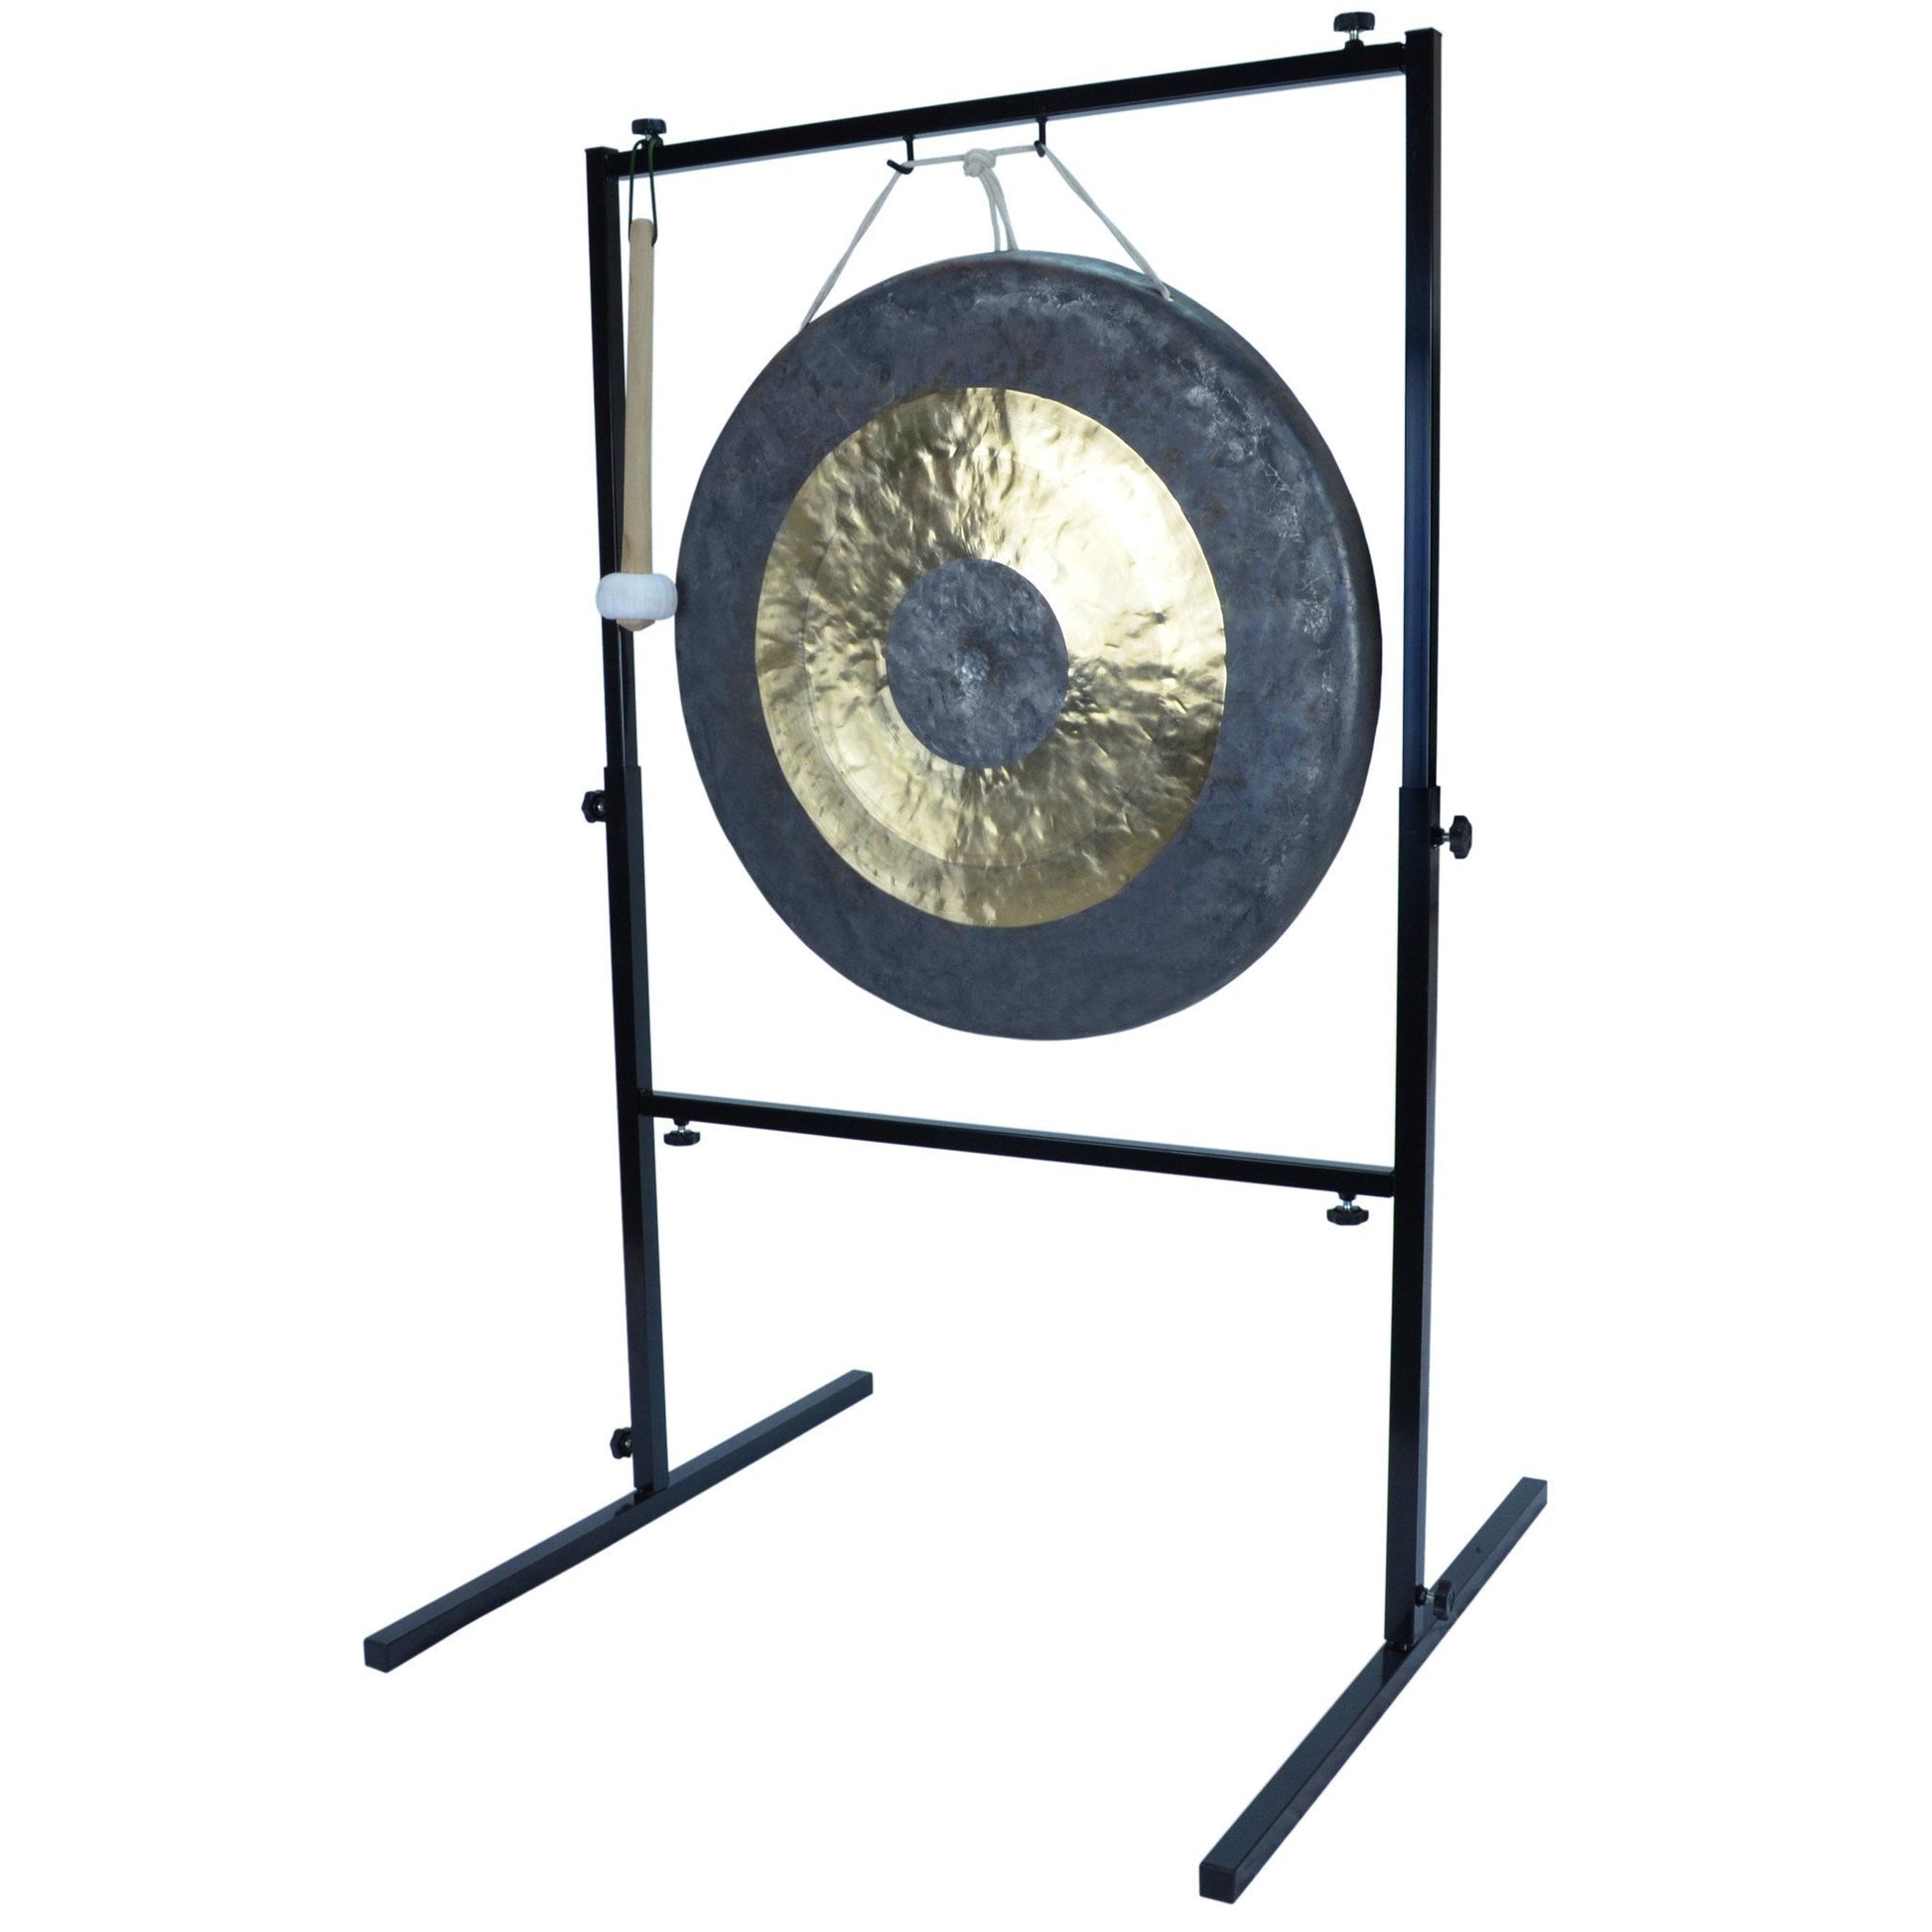 The Gong Shop Large Chinese Gongs with Stand Combos 24" to 34" 26" Chau Gong on Wuhan Gong Stand with Mallet